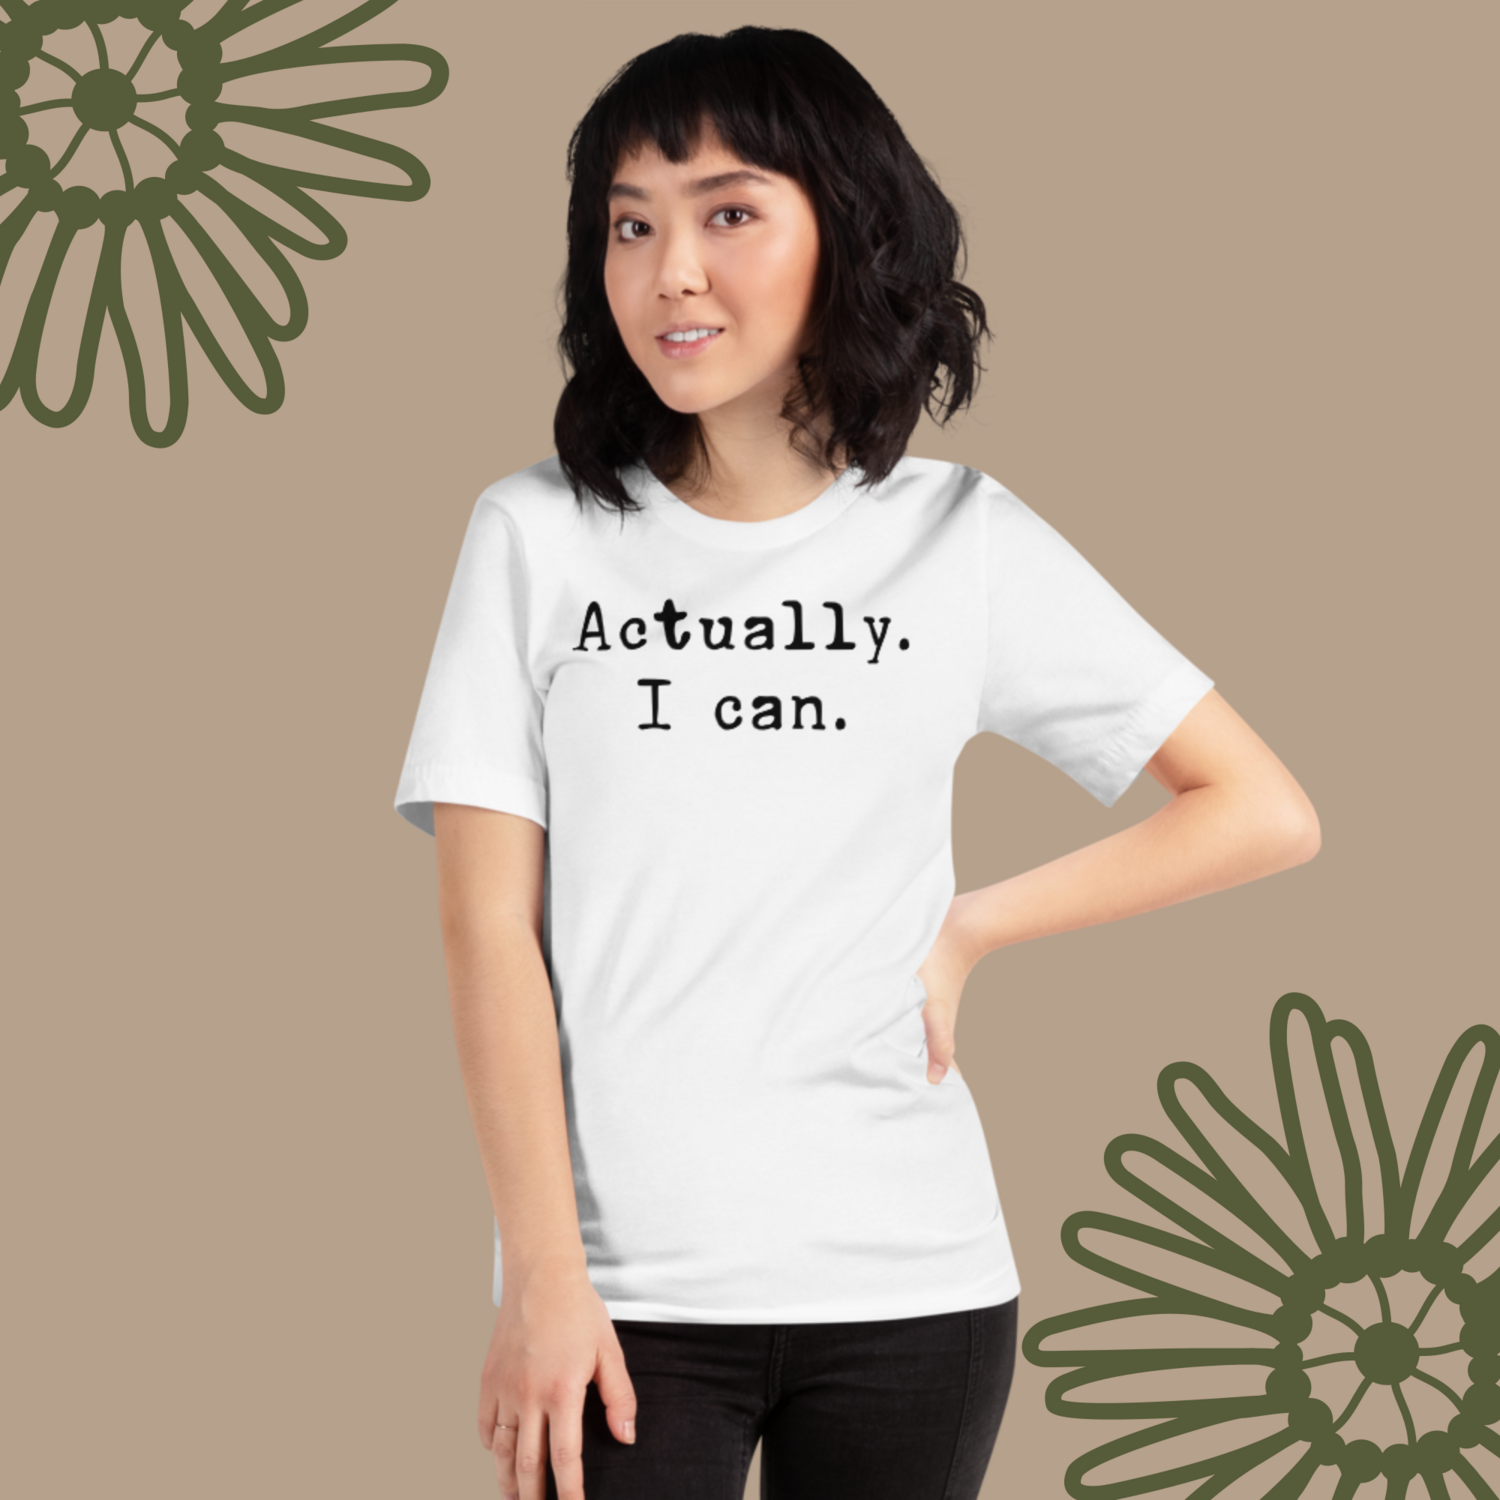 Actually. I can. t-shirt